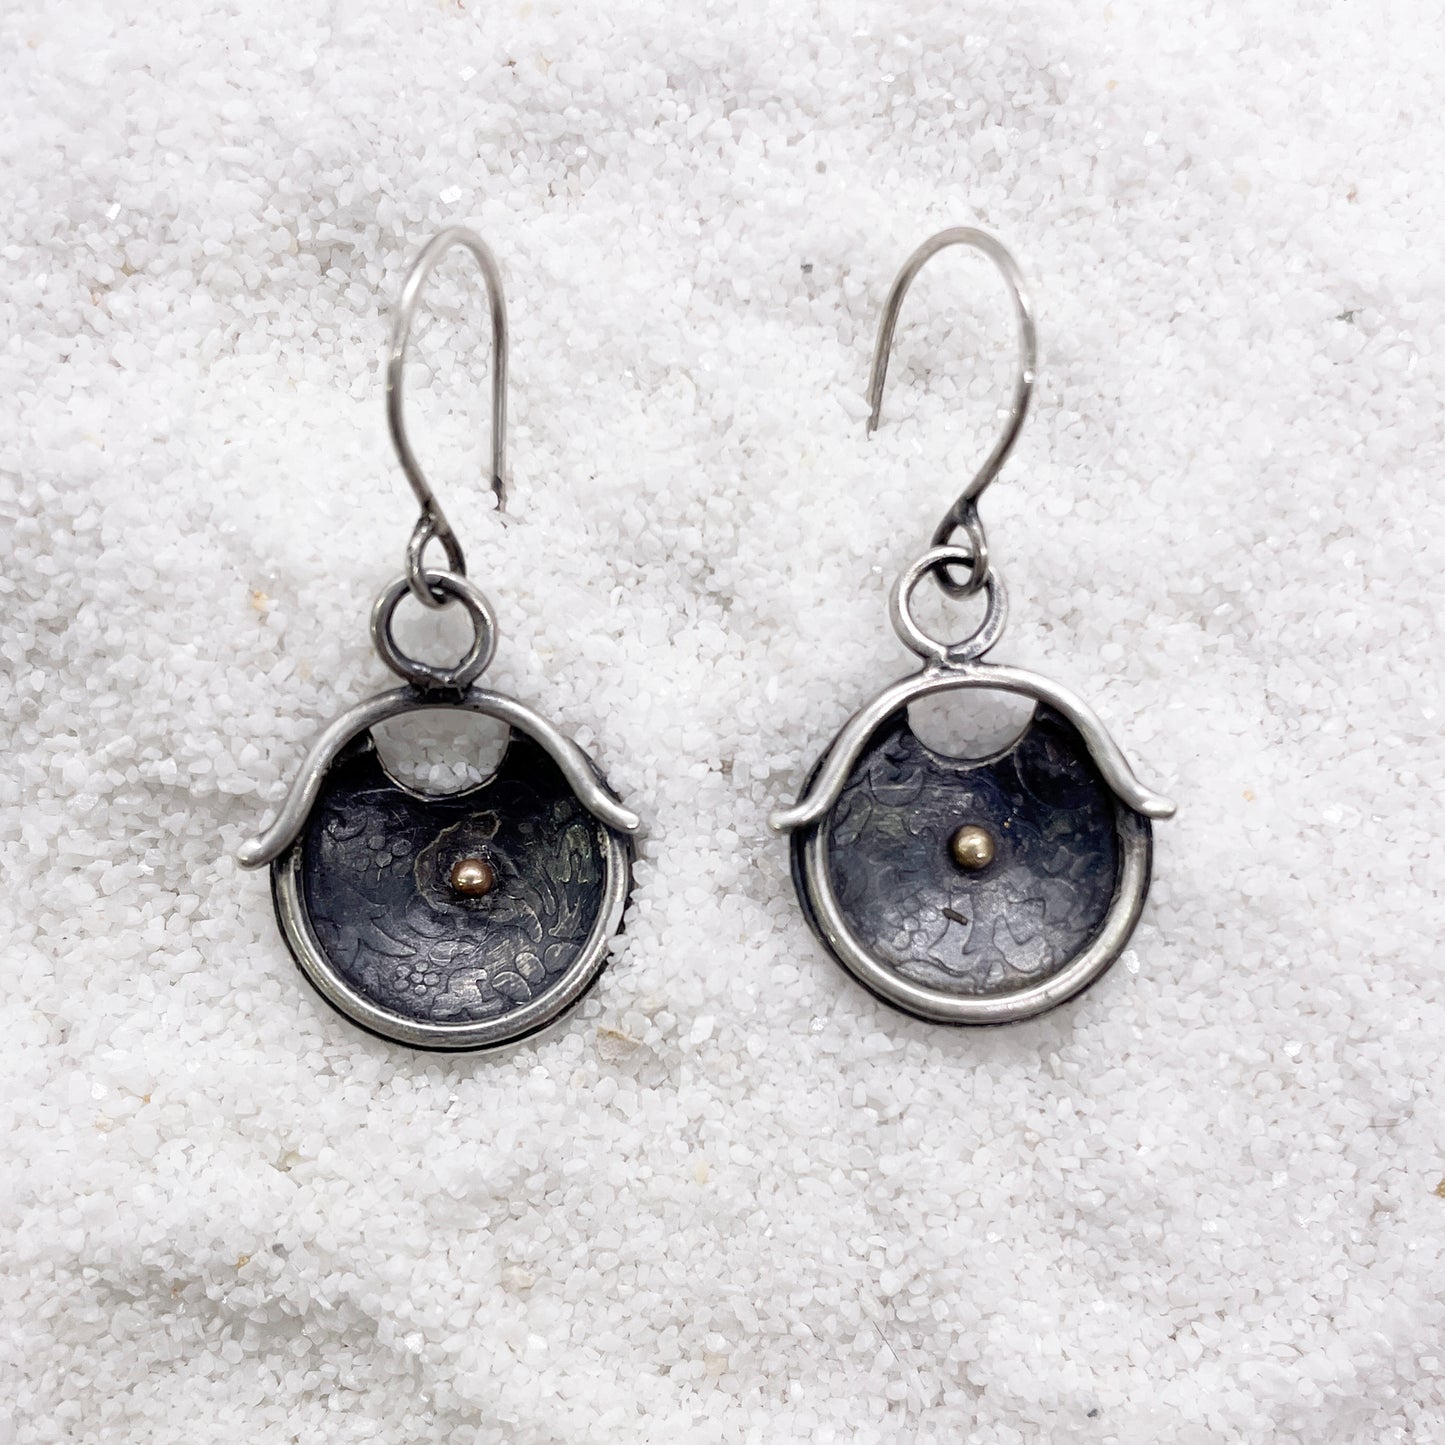 Minimalist Silver and Gold Oxidized Earrings